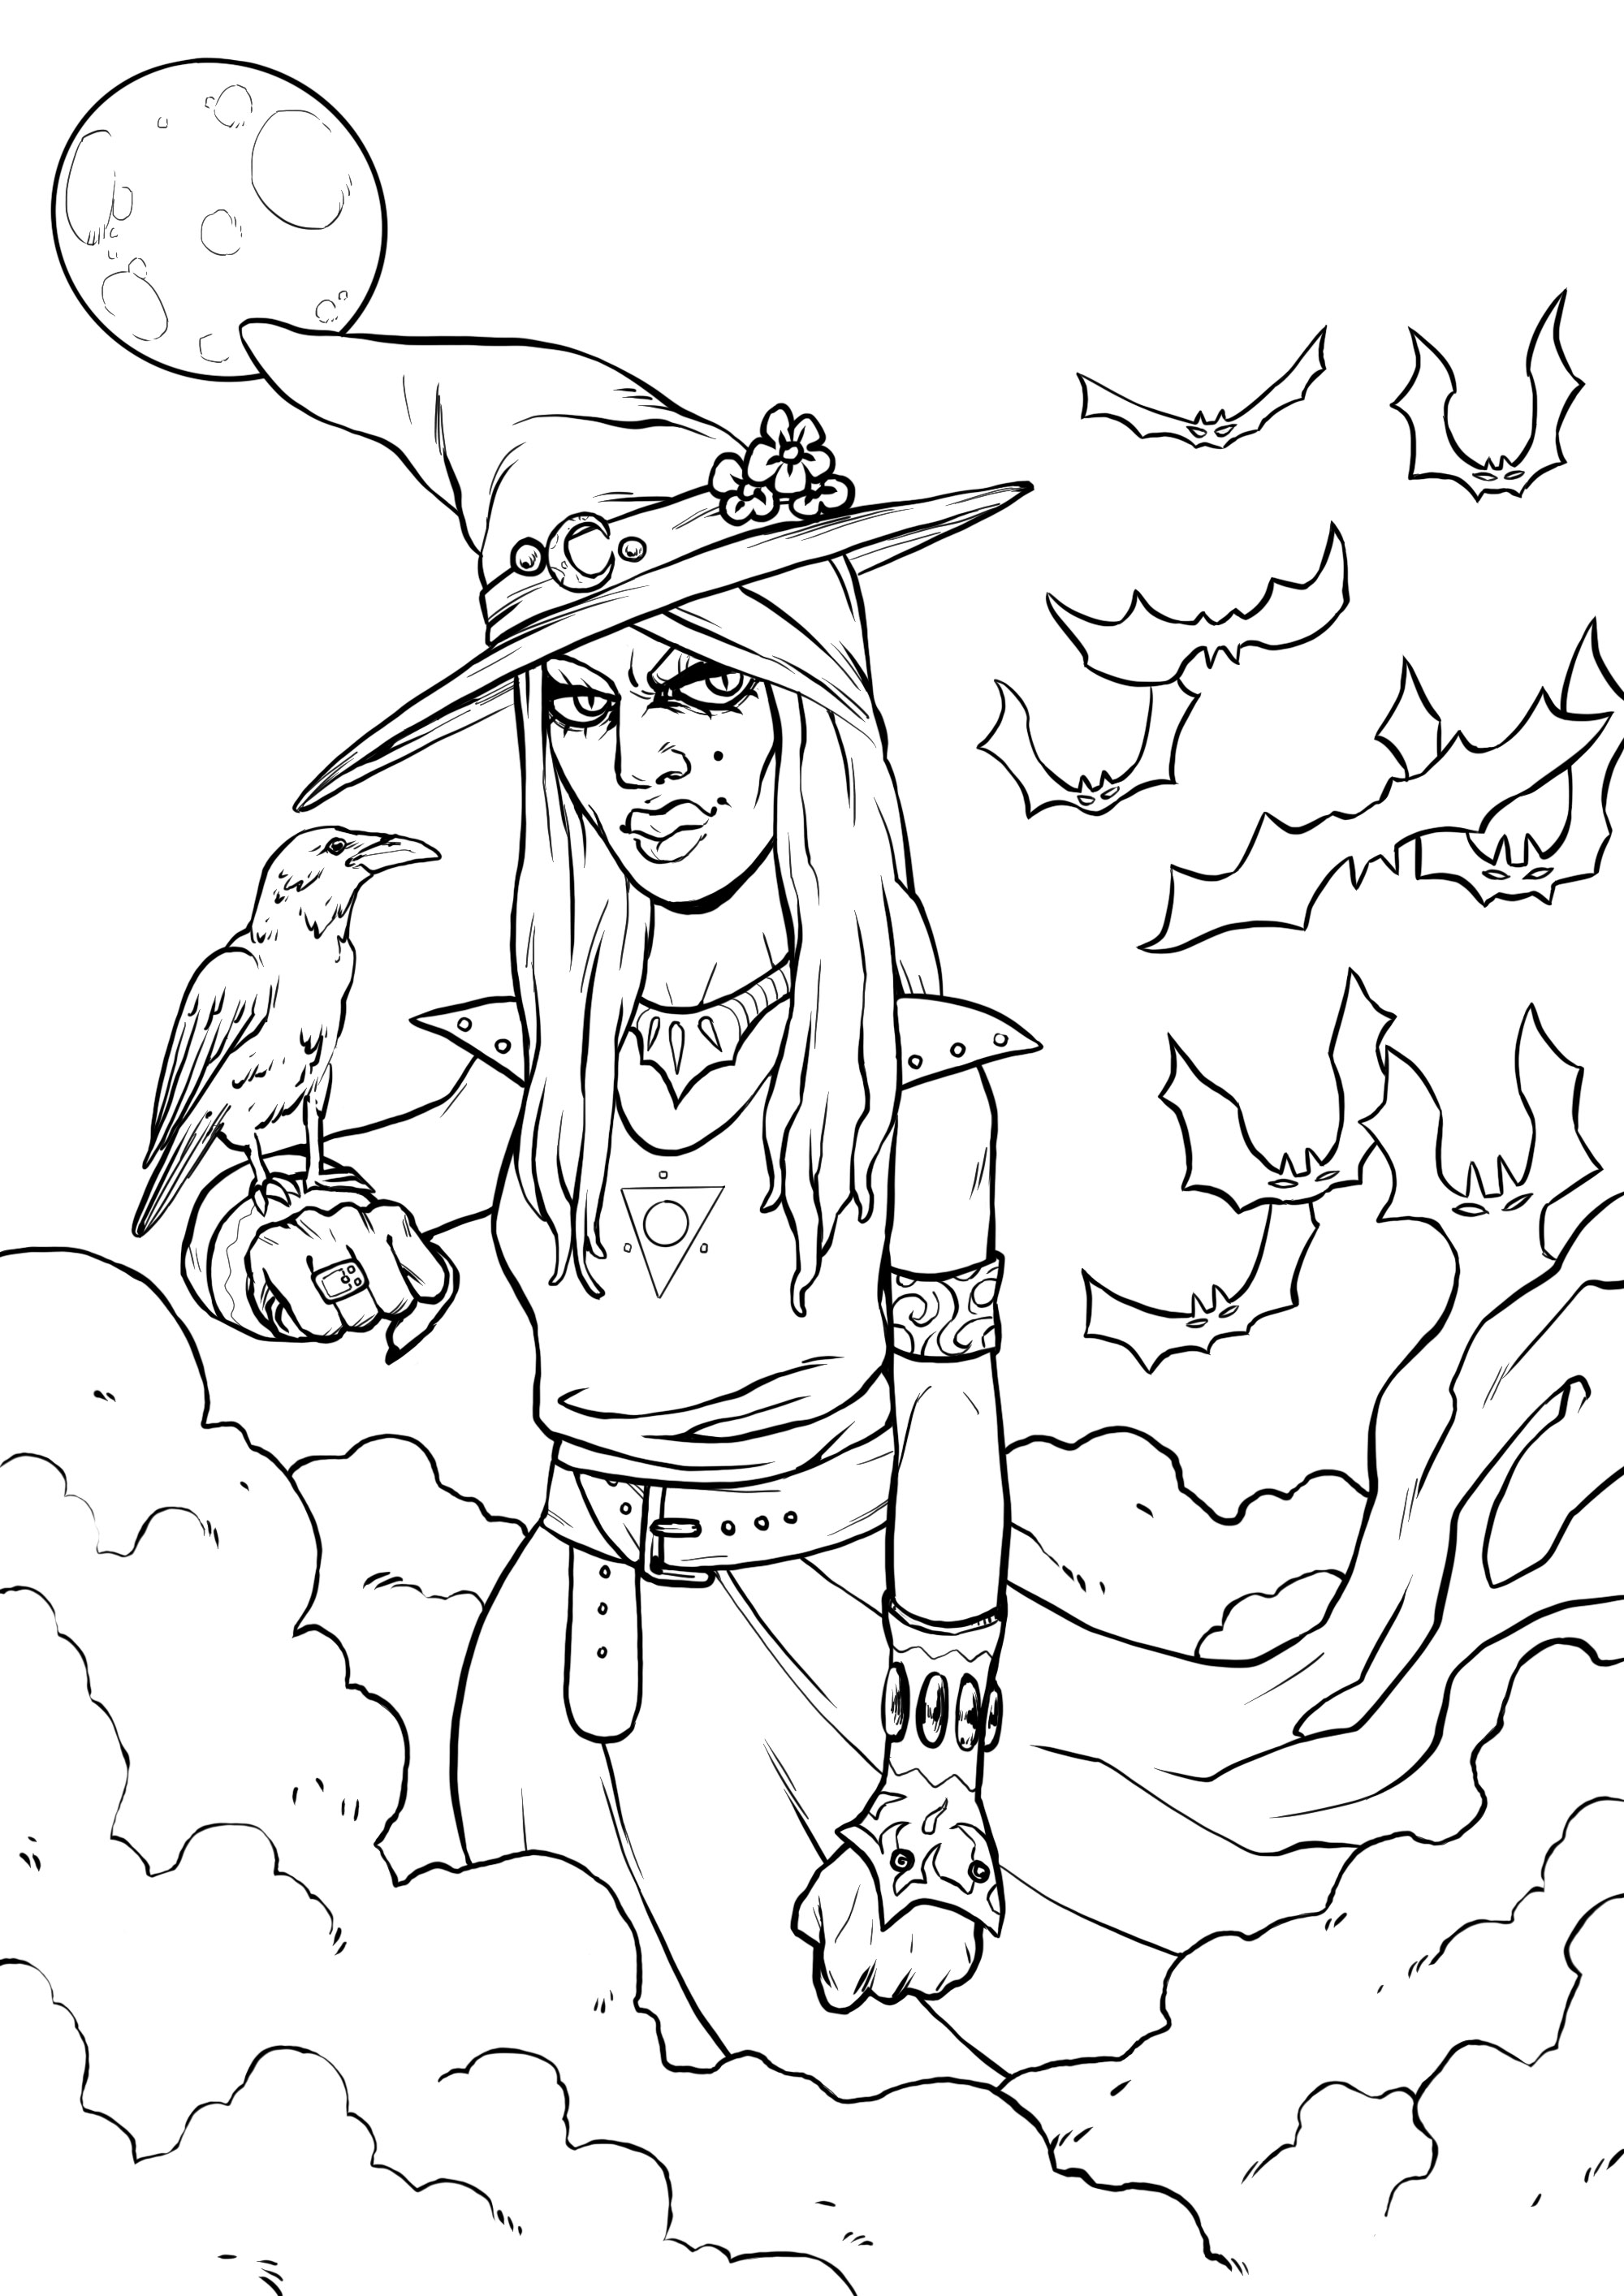 Funny Halloween coloring page